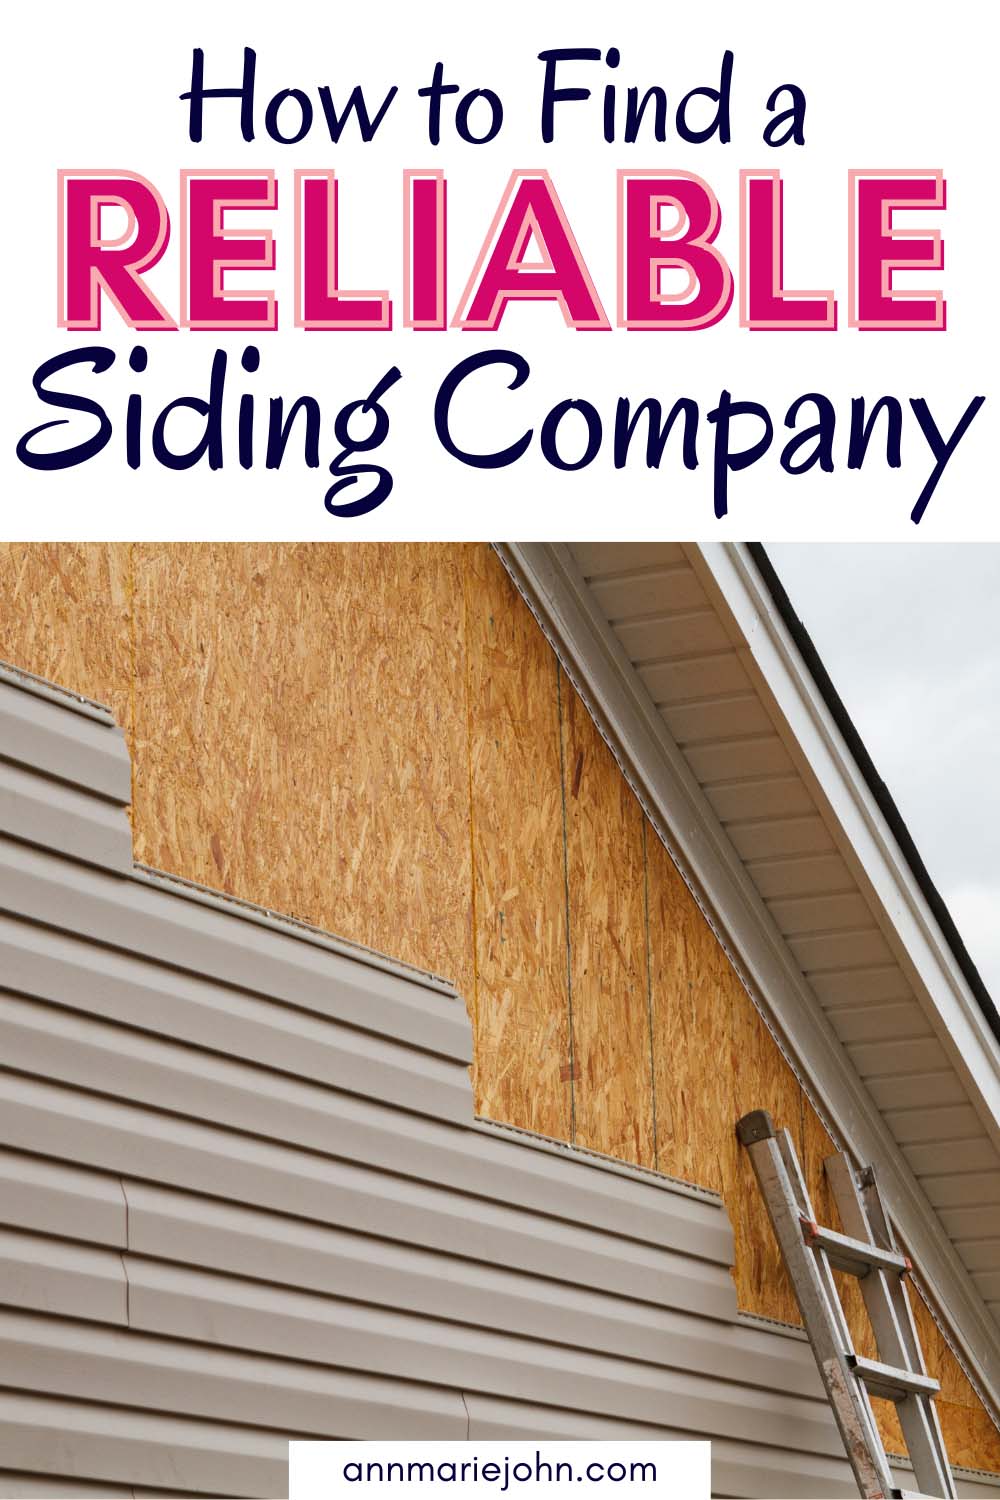 How To Find A Reliable Siding Company